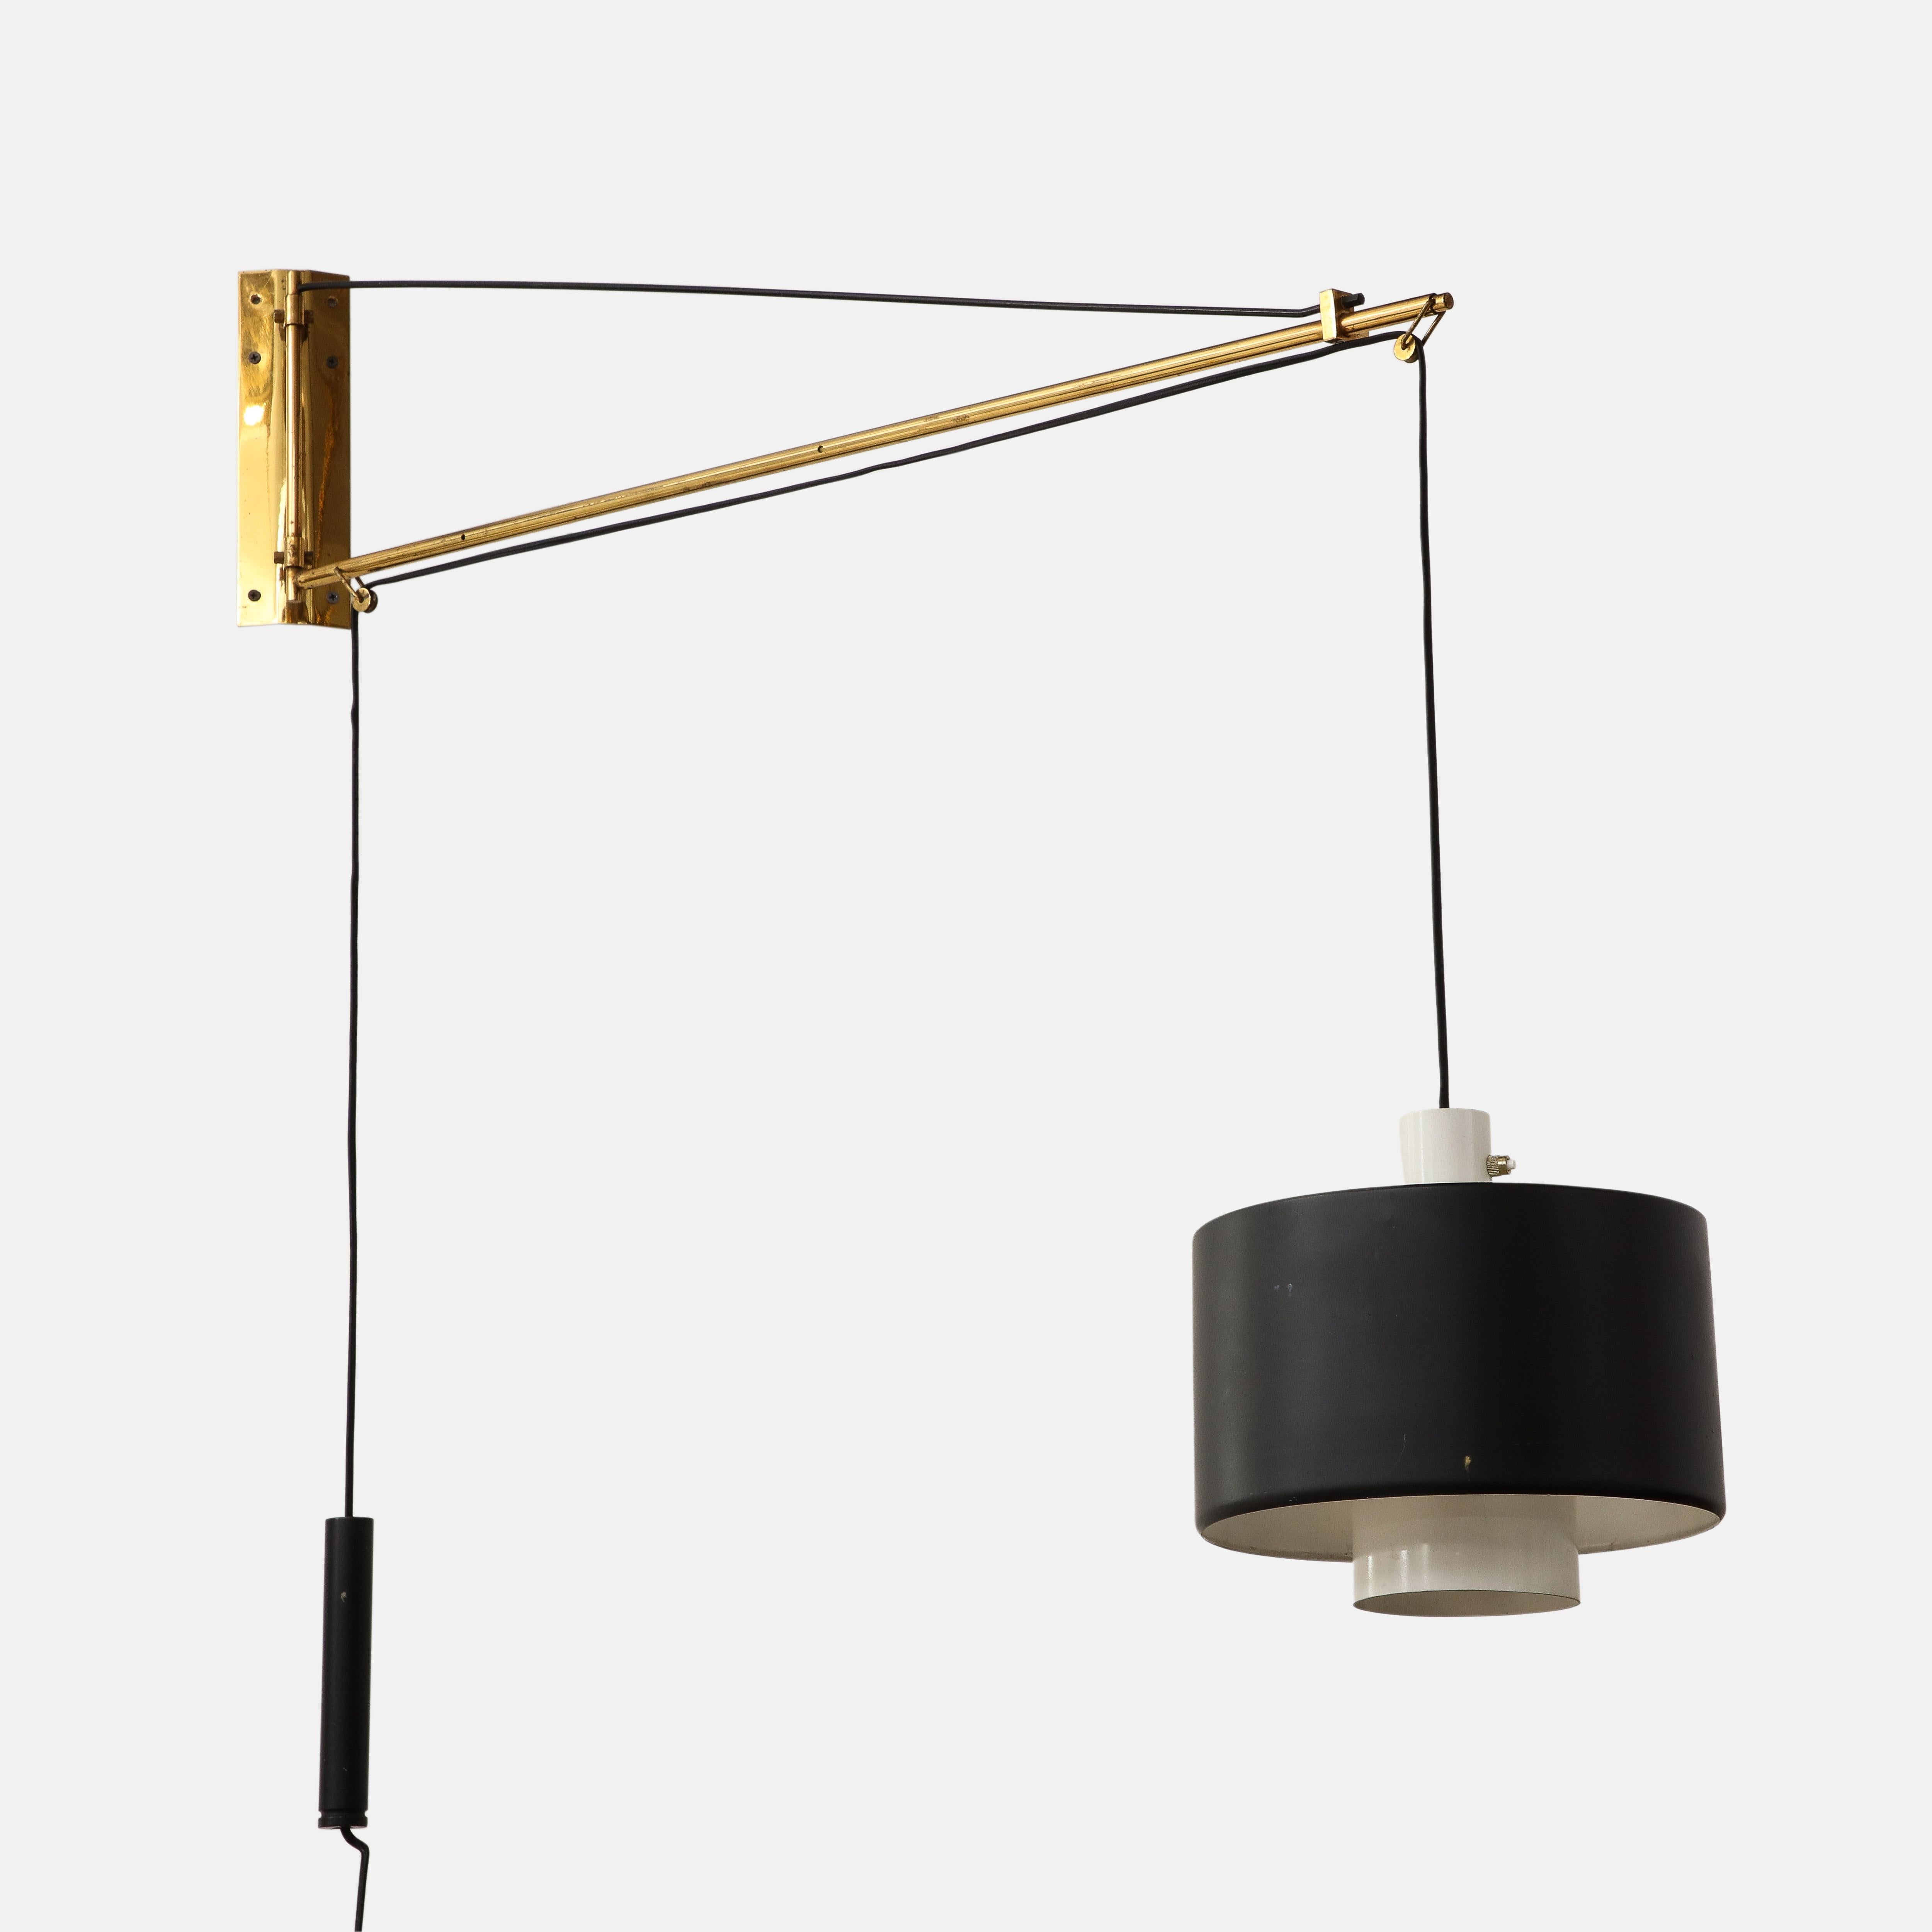 Stilnovo wall light model 2061, Italy, circa 1957. Wall-mounted counterbalance swing arm lamp with brass arm, black enameled metal shade, and counterbalance pulley mechanism for raising and lowering the shade. Signed on backplate 'stilnovo